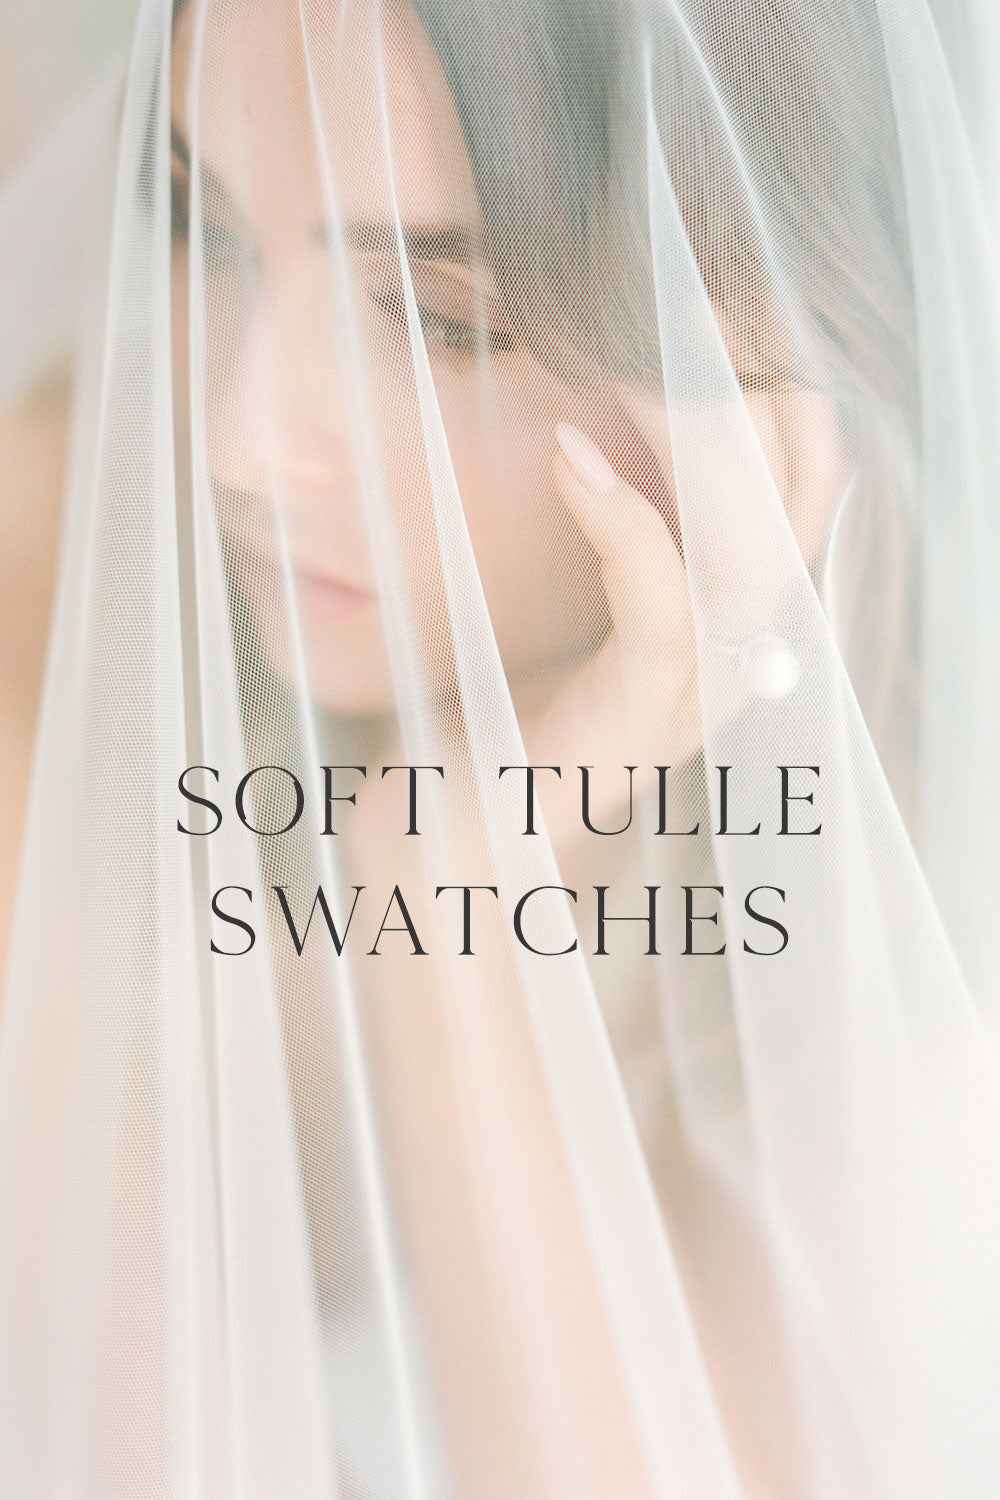 SOFT TULLE Swatches